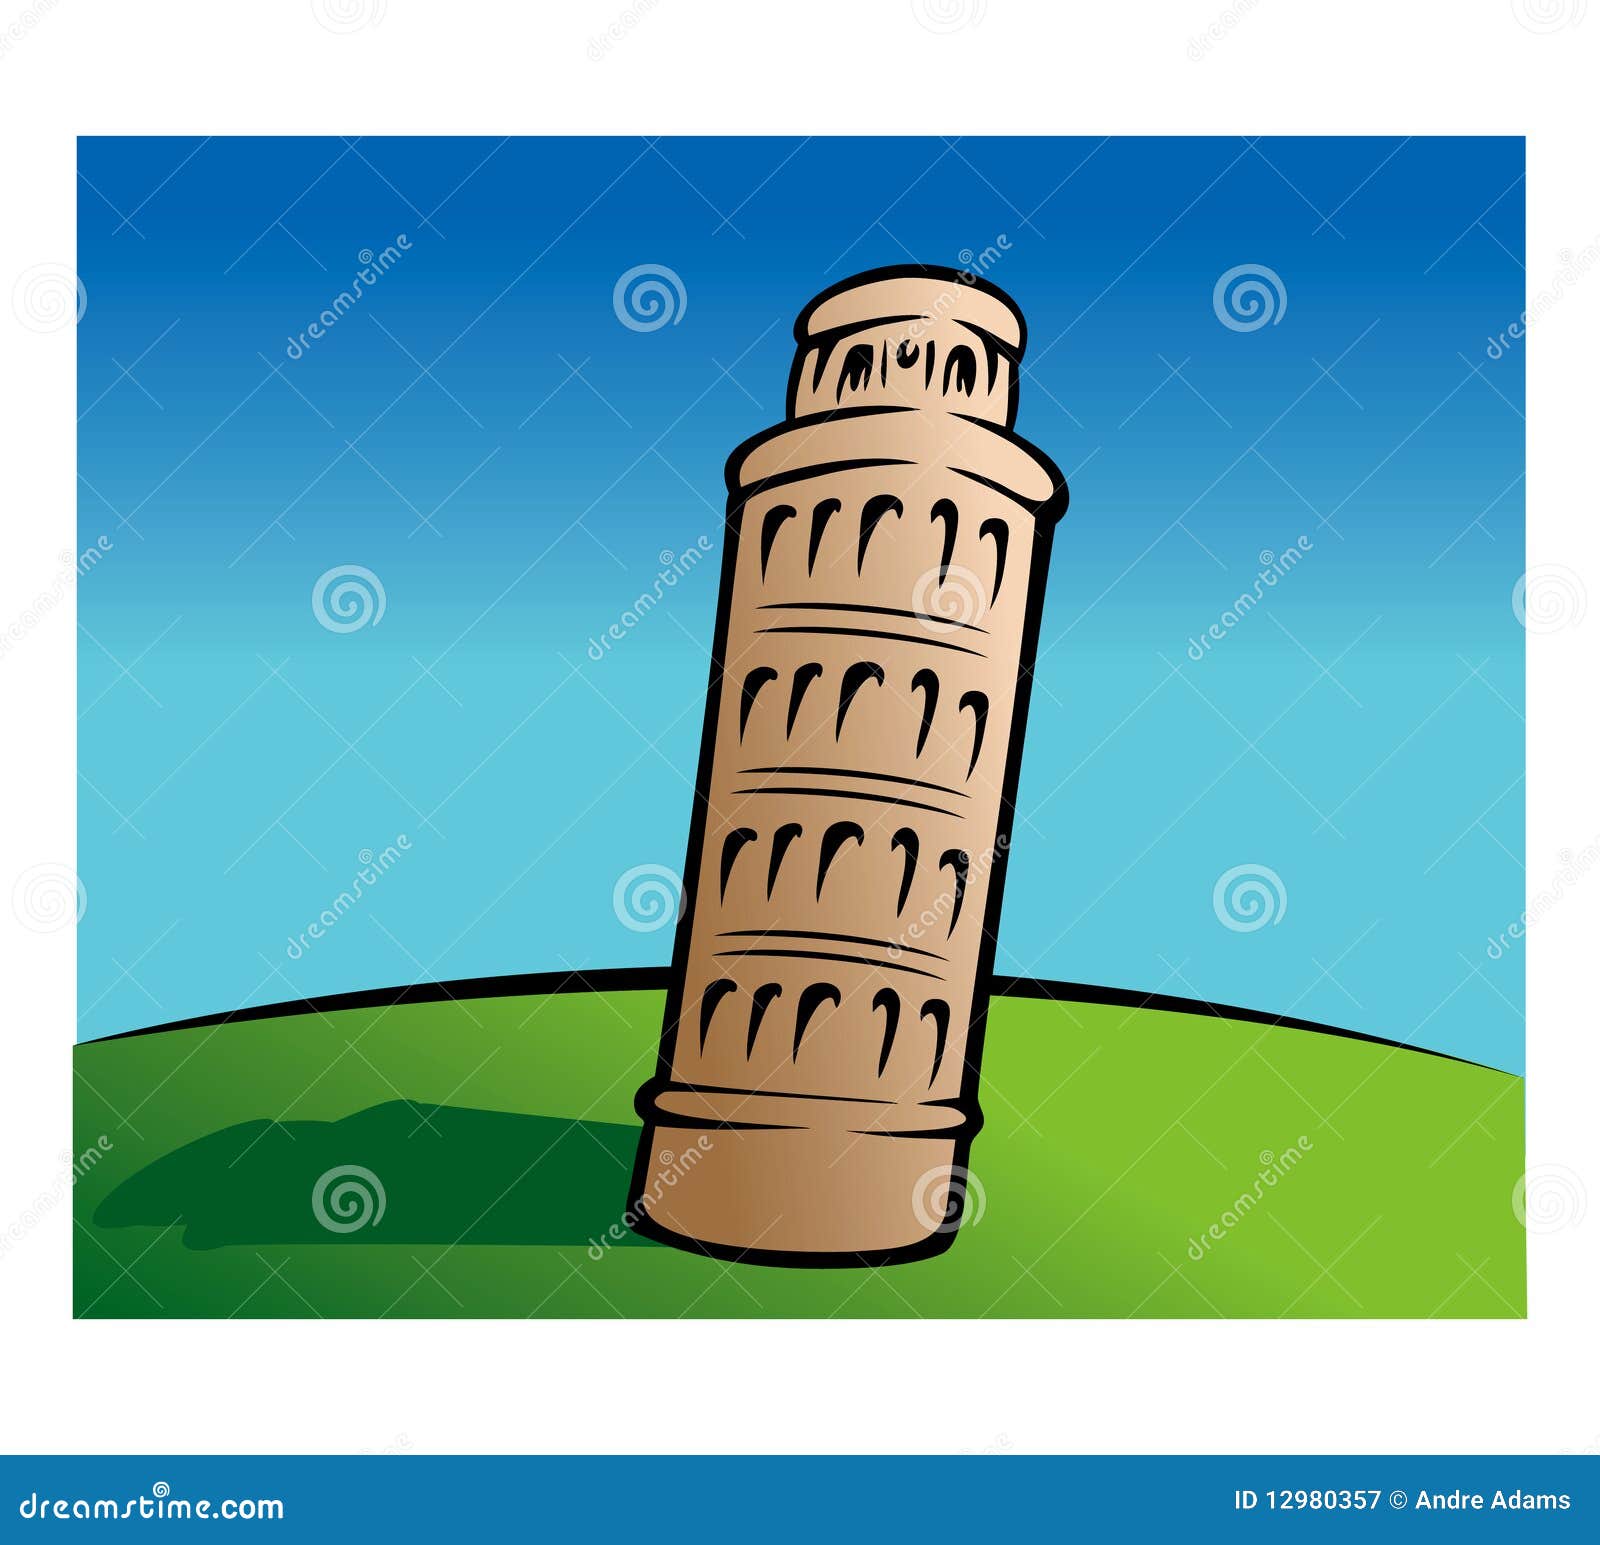 Leaning tower of Pisa stock vector. Illustration of visit - 12980357